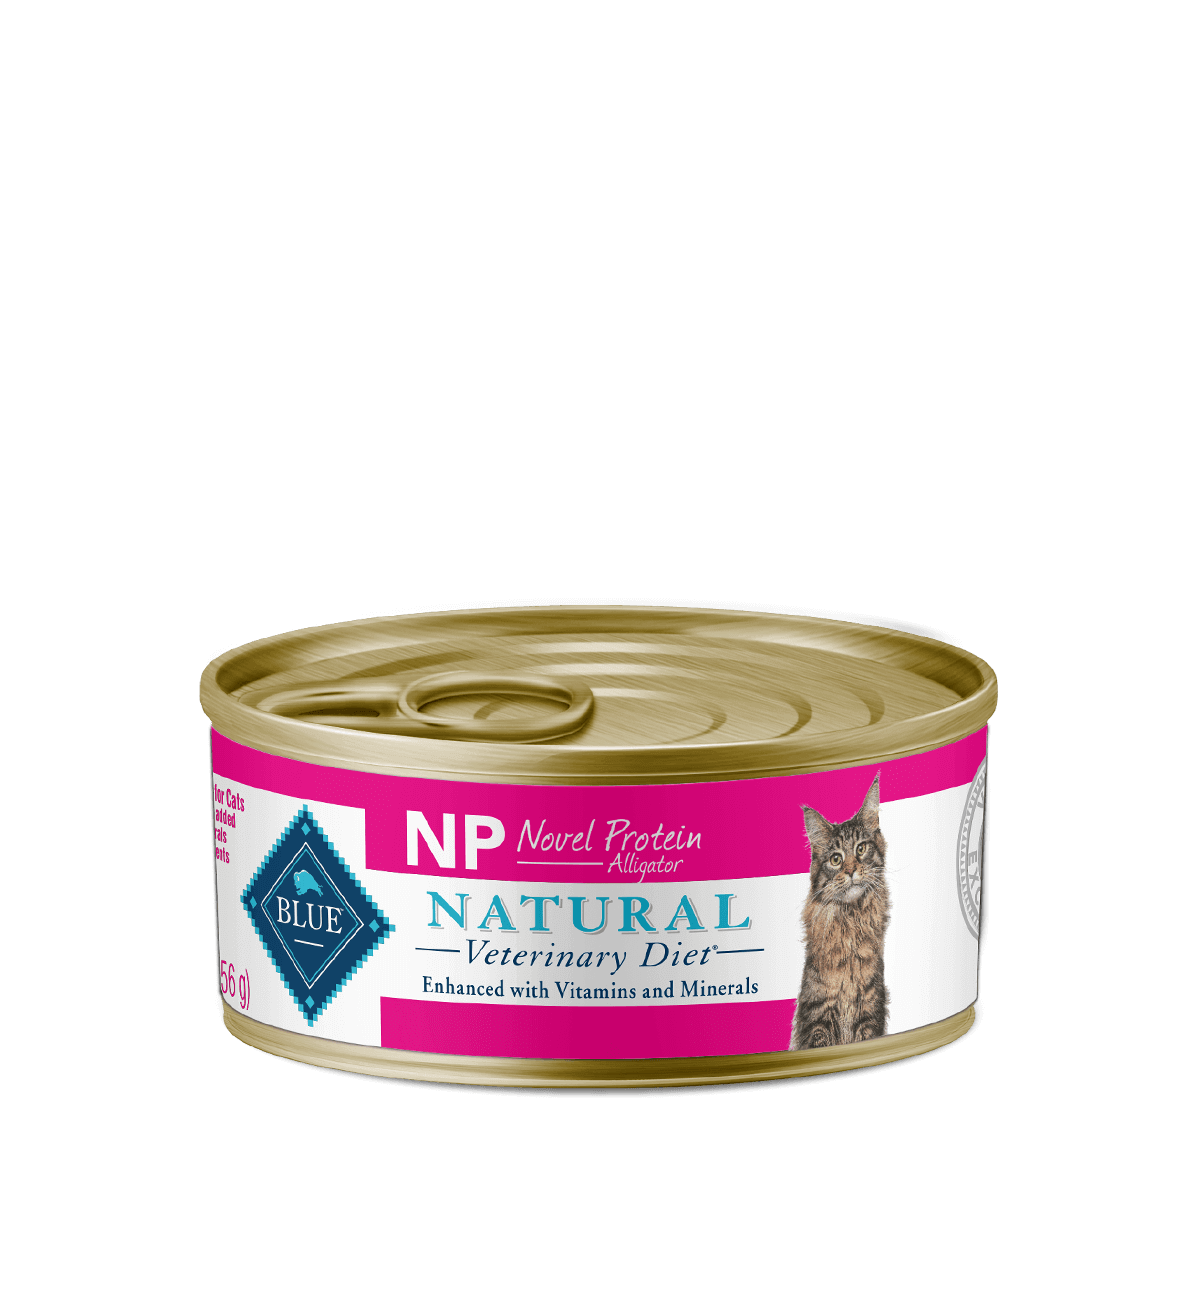 blue natural veterinary diet np novel protein cat wet food